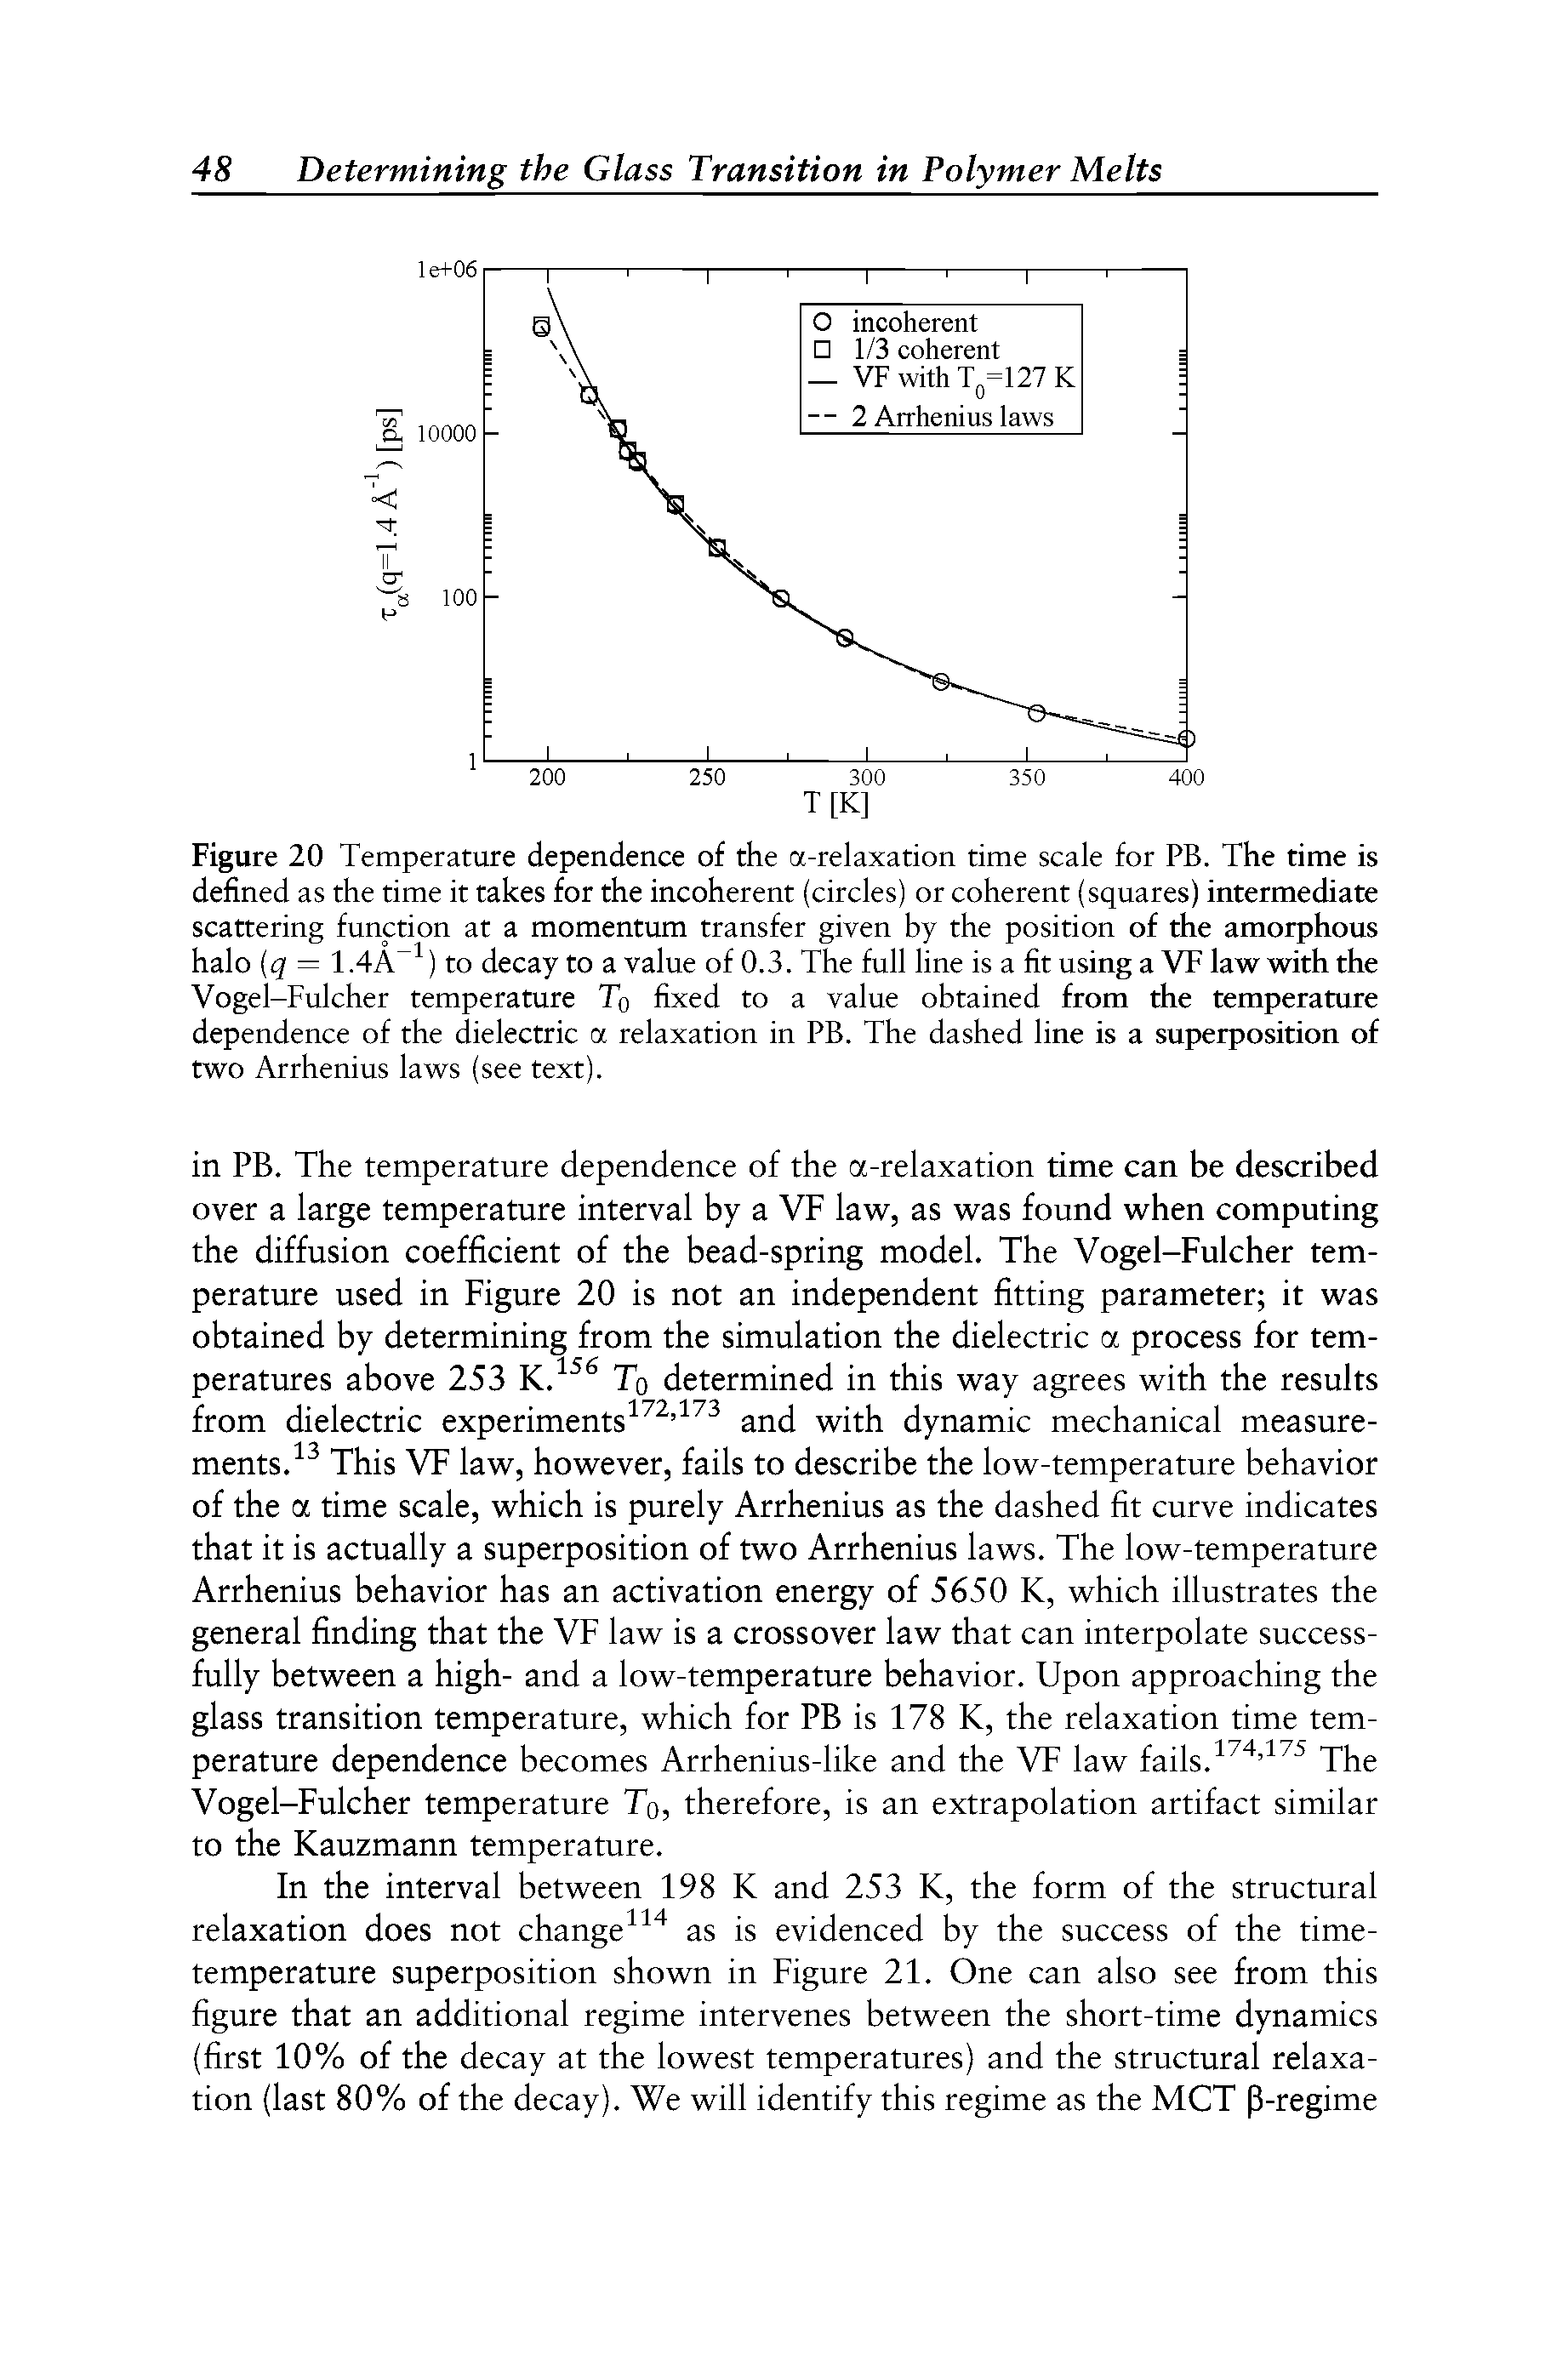 Figure 20 Temperature dependence of the a-relaxation time scale for PB. The time is defined as the time it takes for the incoherent (circles) or coherent (squares) intermediate scattering function at a momentum transfer given by the position of the amorphous halo (q — 1.4A-1) to decay to a value of 0.3. The full line is a fit using a VF law with the Vogel-Fulcher temperature T0 fixed to a value obtained from the temperature dependence of the dielectric a relaxation in PB. The dashed line is a superposition of two Arrhenius laws (see text).